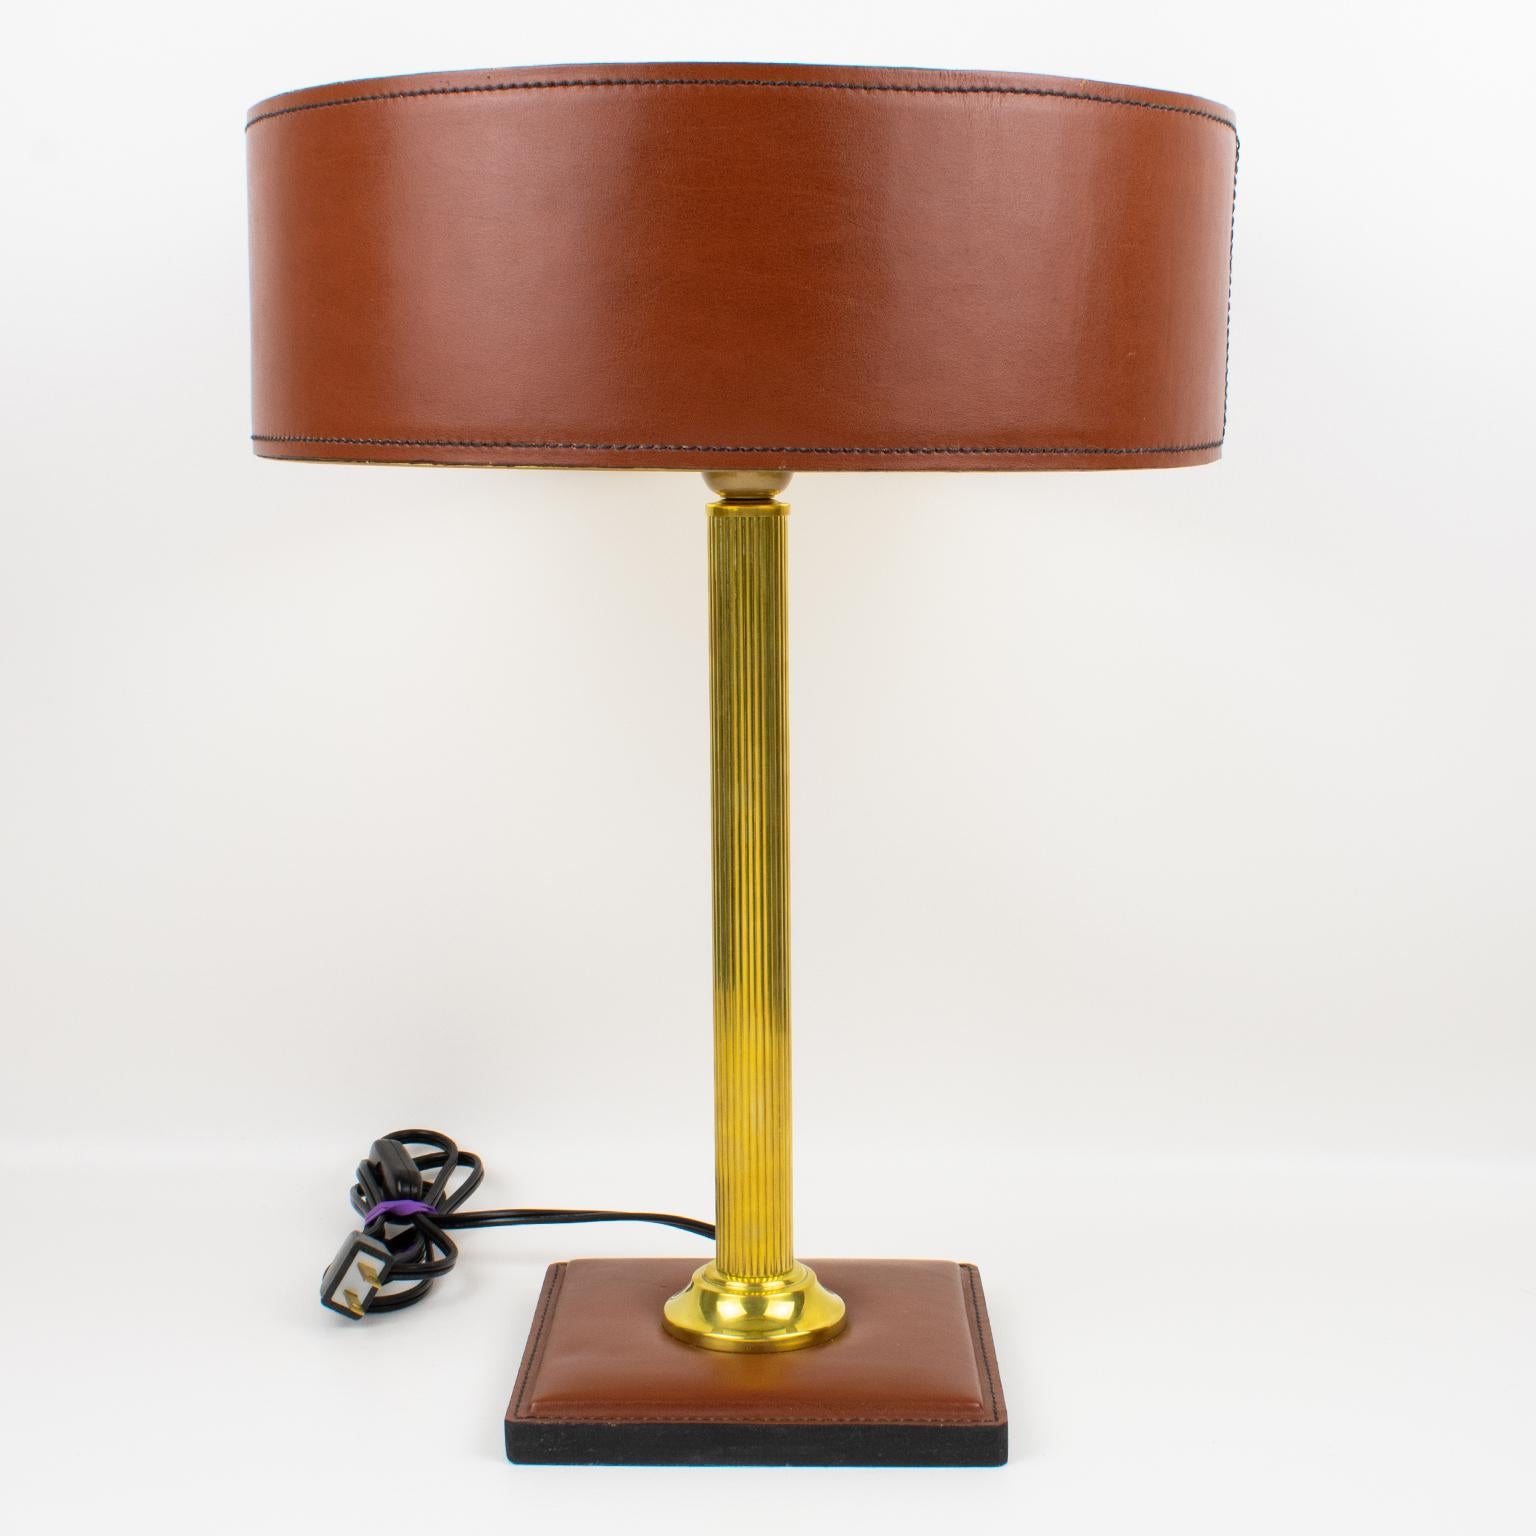 Elegant table lamp designed by Jacques Adnet (1901 - 1984). A classical cinnamon brown color lamp features a hand-stitched shade with gilded paper lining, polished brass reeded column stem, and a square base in the same hand-stitched brown leather.